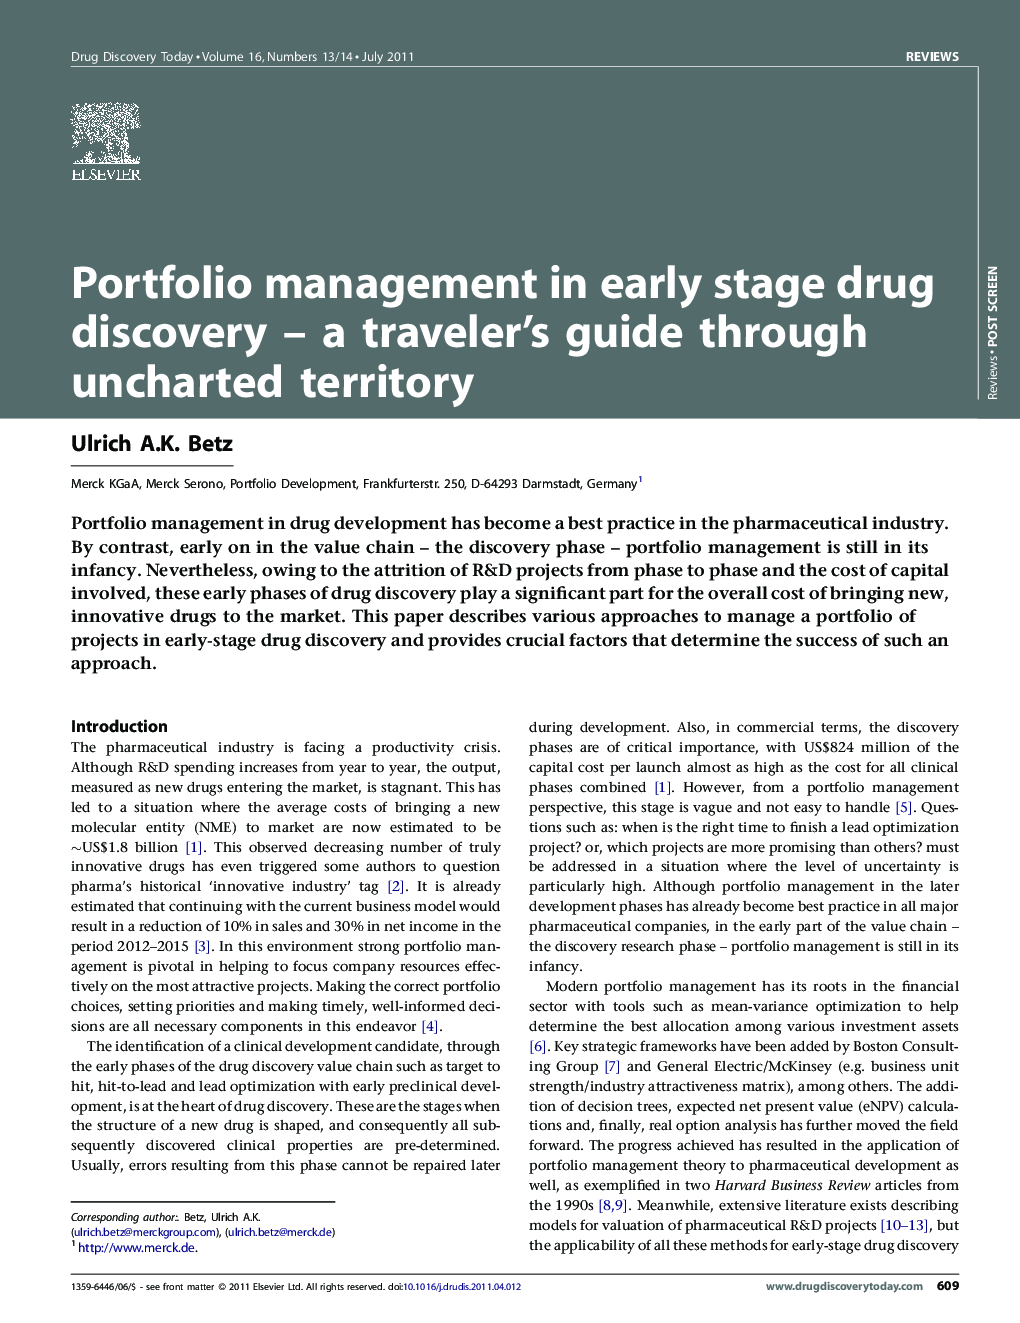 Portfolio management in early stage drug discovery – a traveler's guide through uncharted territory